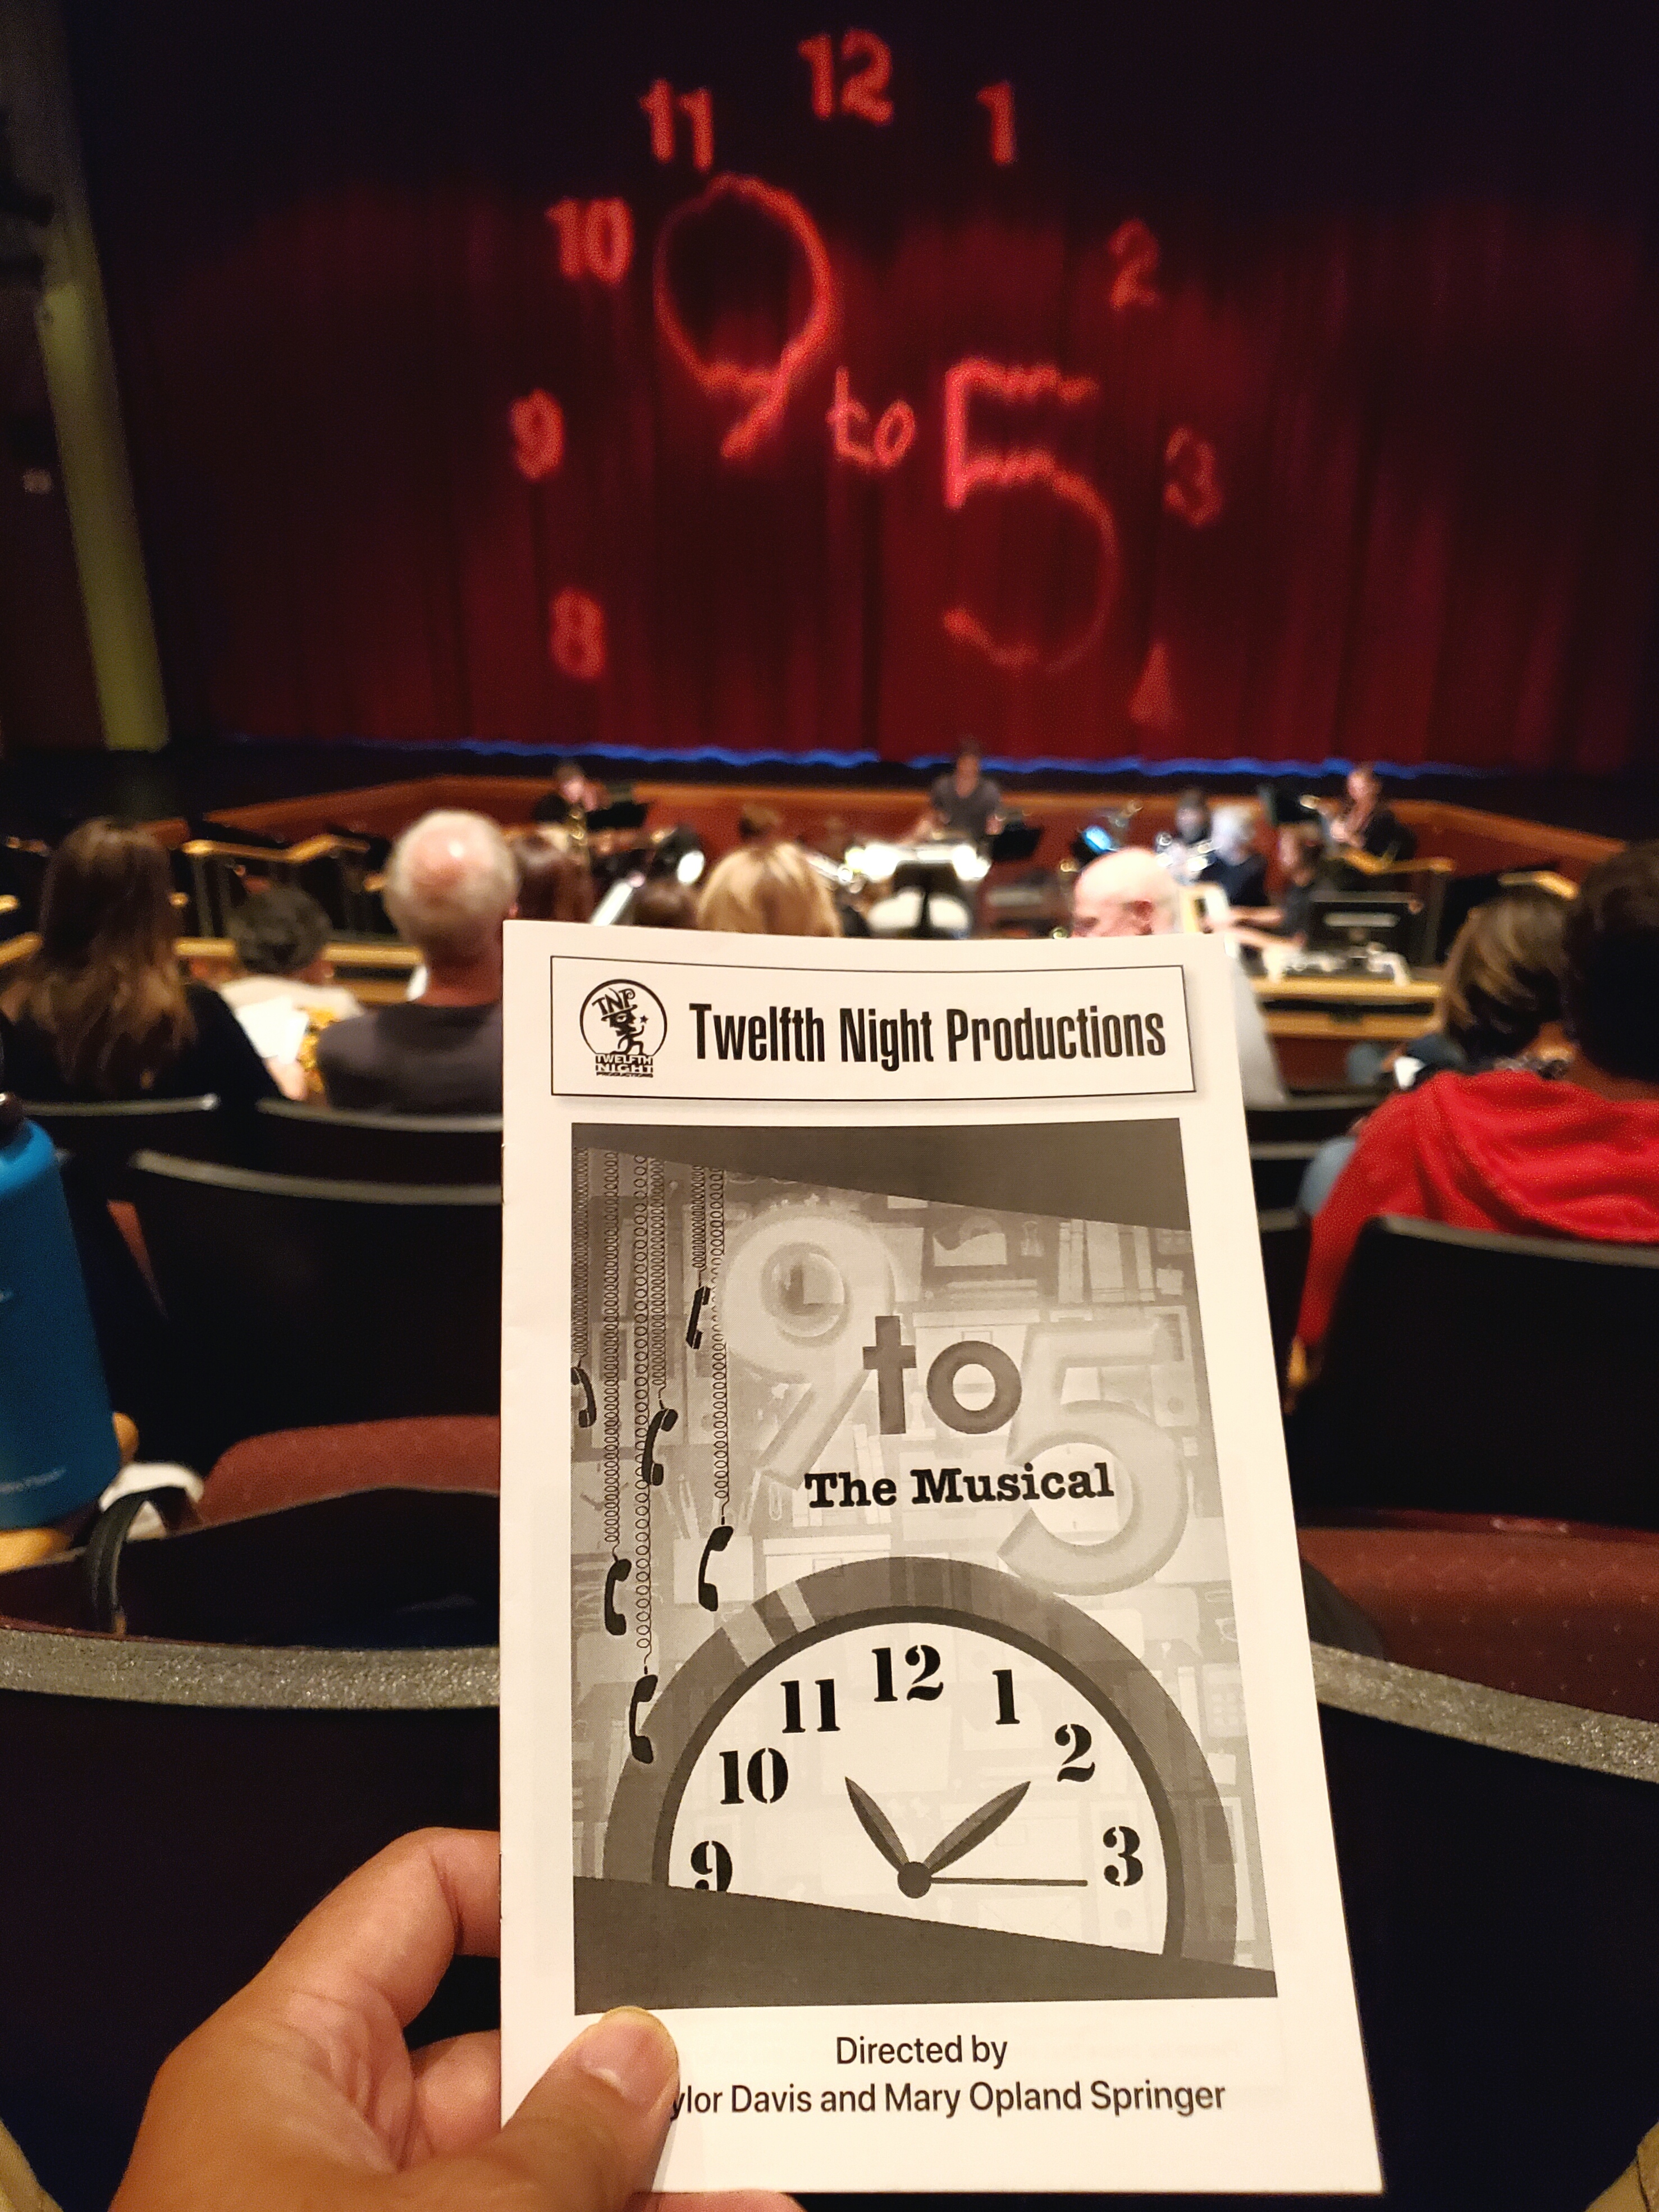 9 to 5 the Musical w/ Twelfth Night Productions. Good Dolly Parton impersonation. Always pleasantly surprised when a community theater cast manages to perform a decent tap dance break. Lots of potential needed better sound engineering to fully showcase the talent. Poorly-written unconvincing ending.  #musical #secretaries